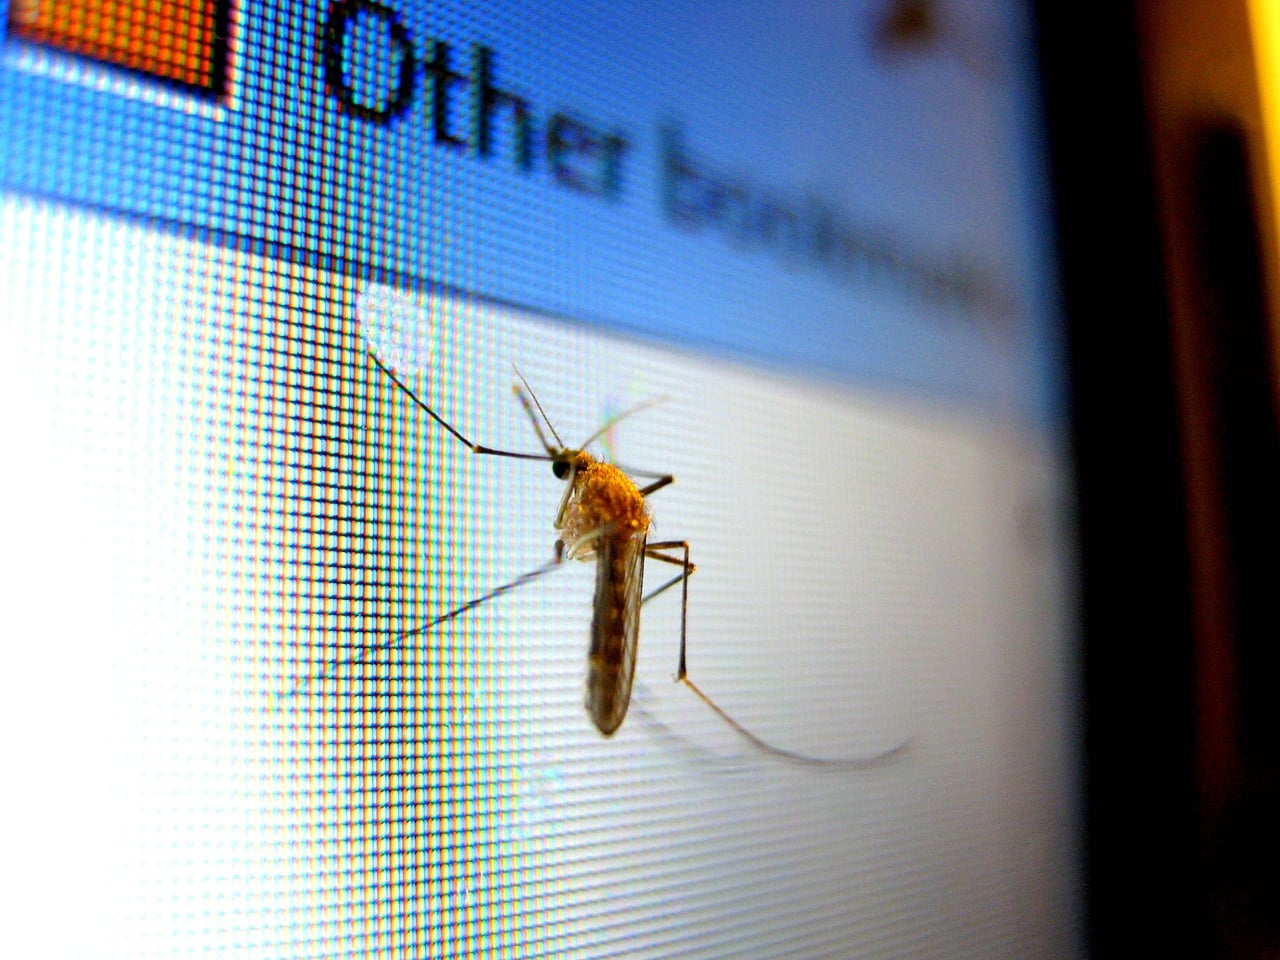 Mosquito on a computer screen